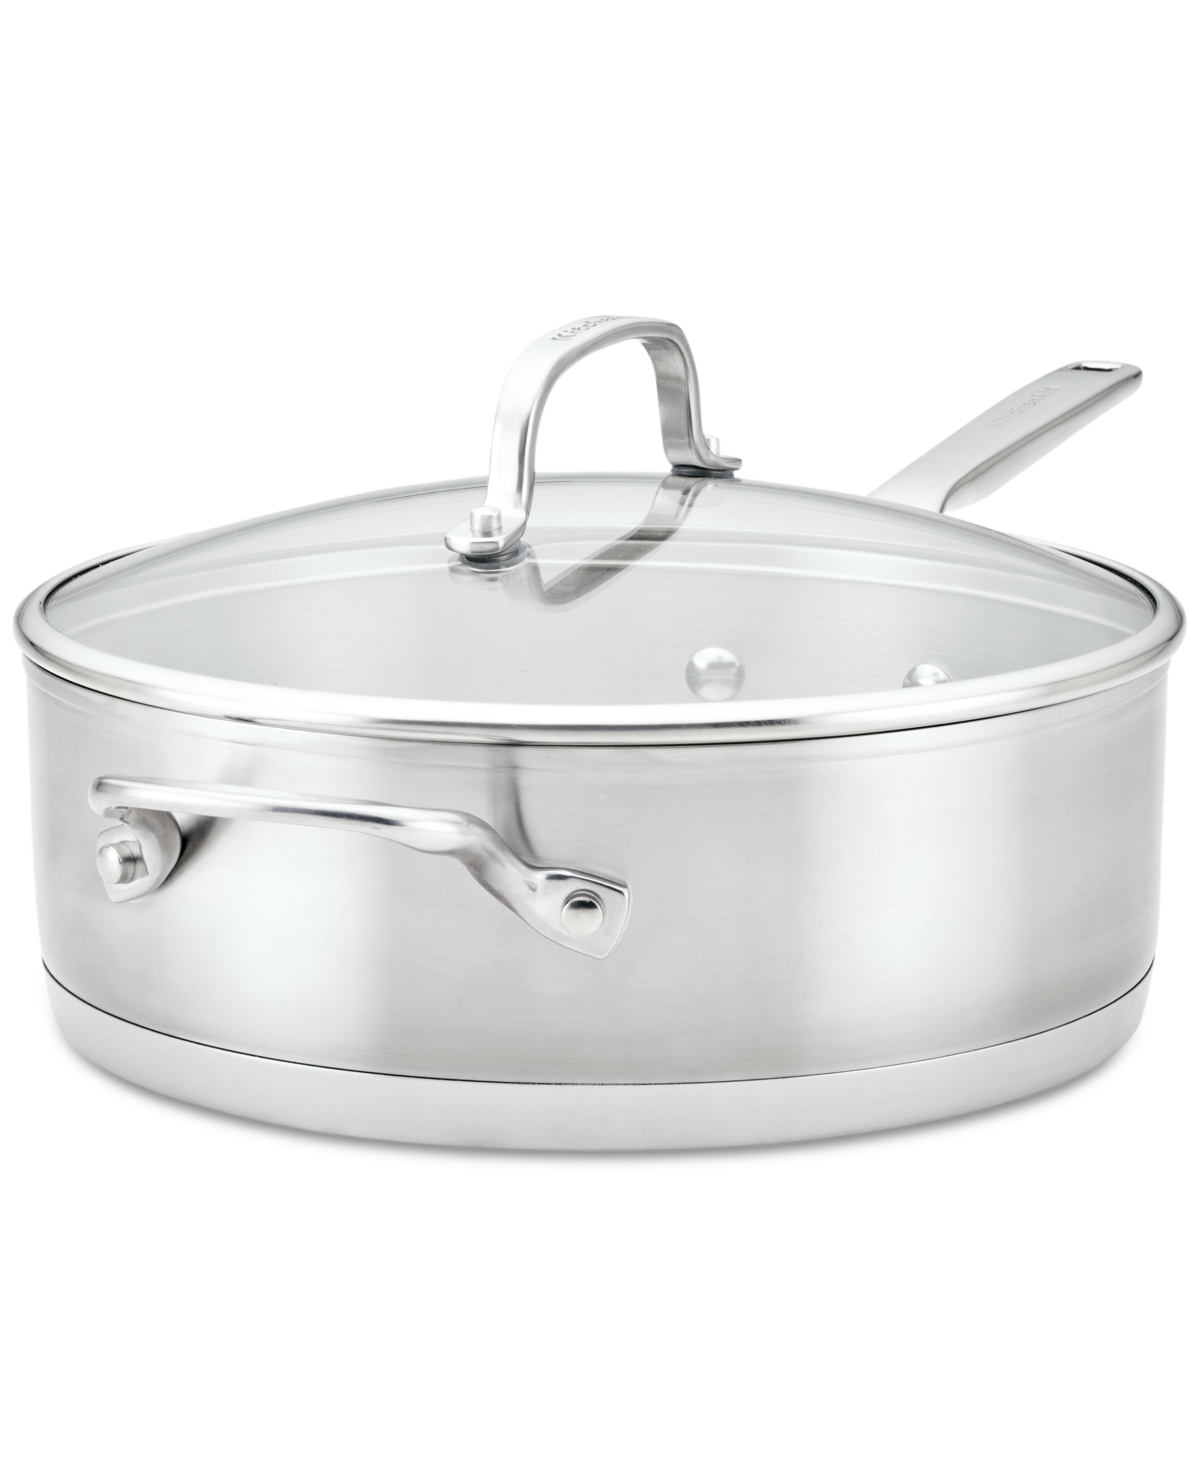 Kitchenaid 3-ply Base Stainless Steel 4.5 Quart Induction Saute Pan With Helper Handle And Lid In Silver